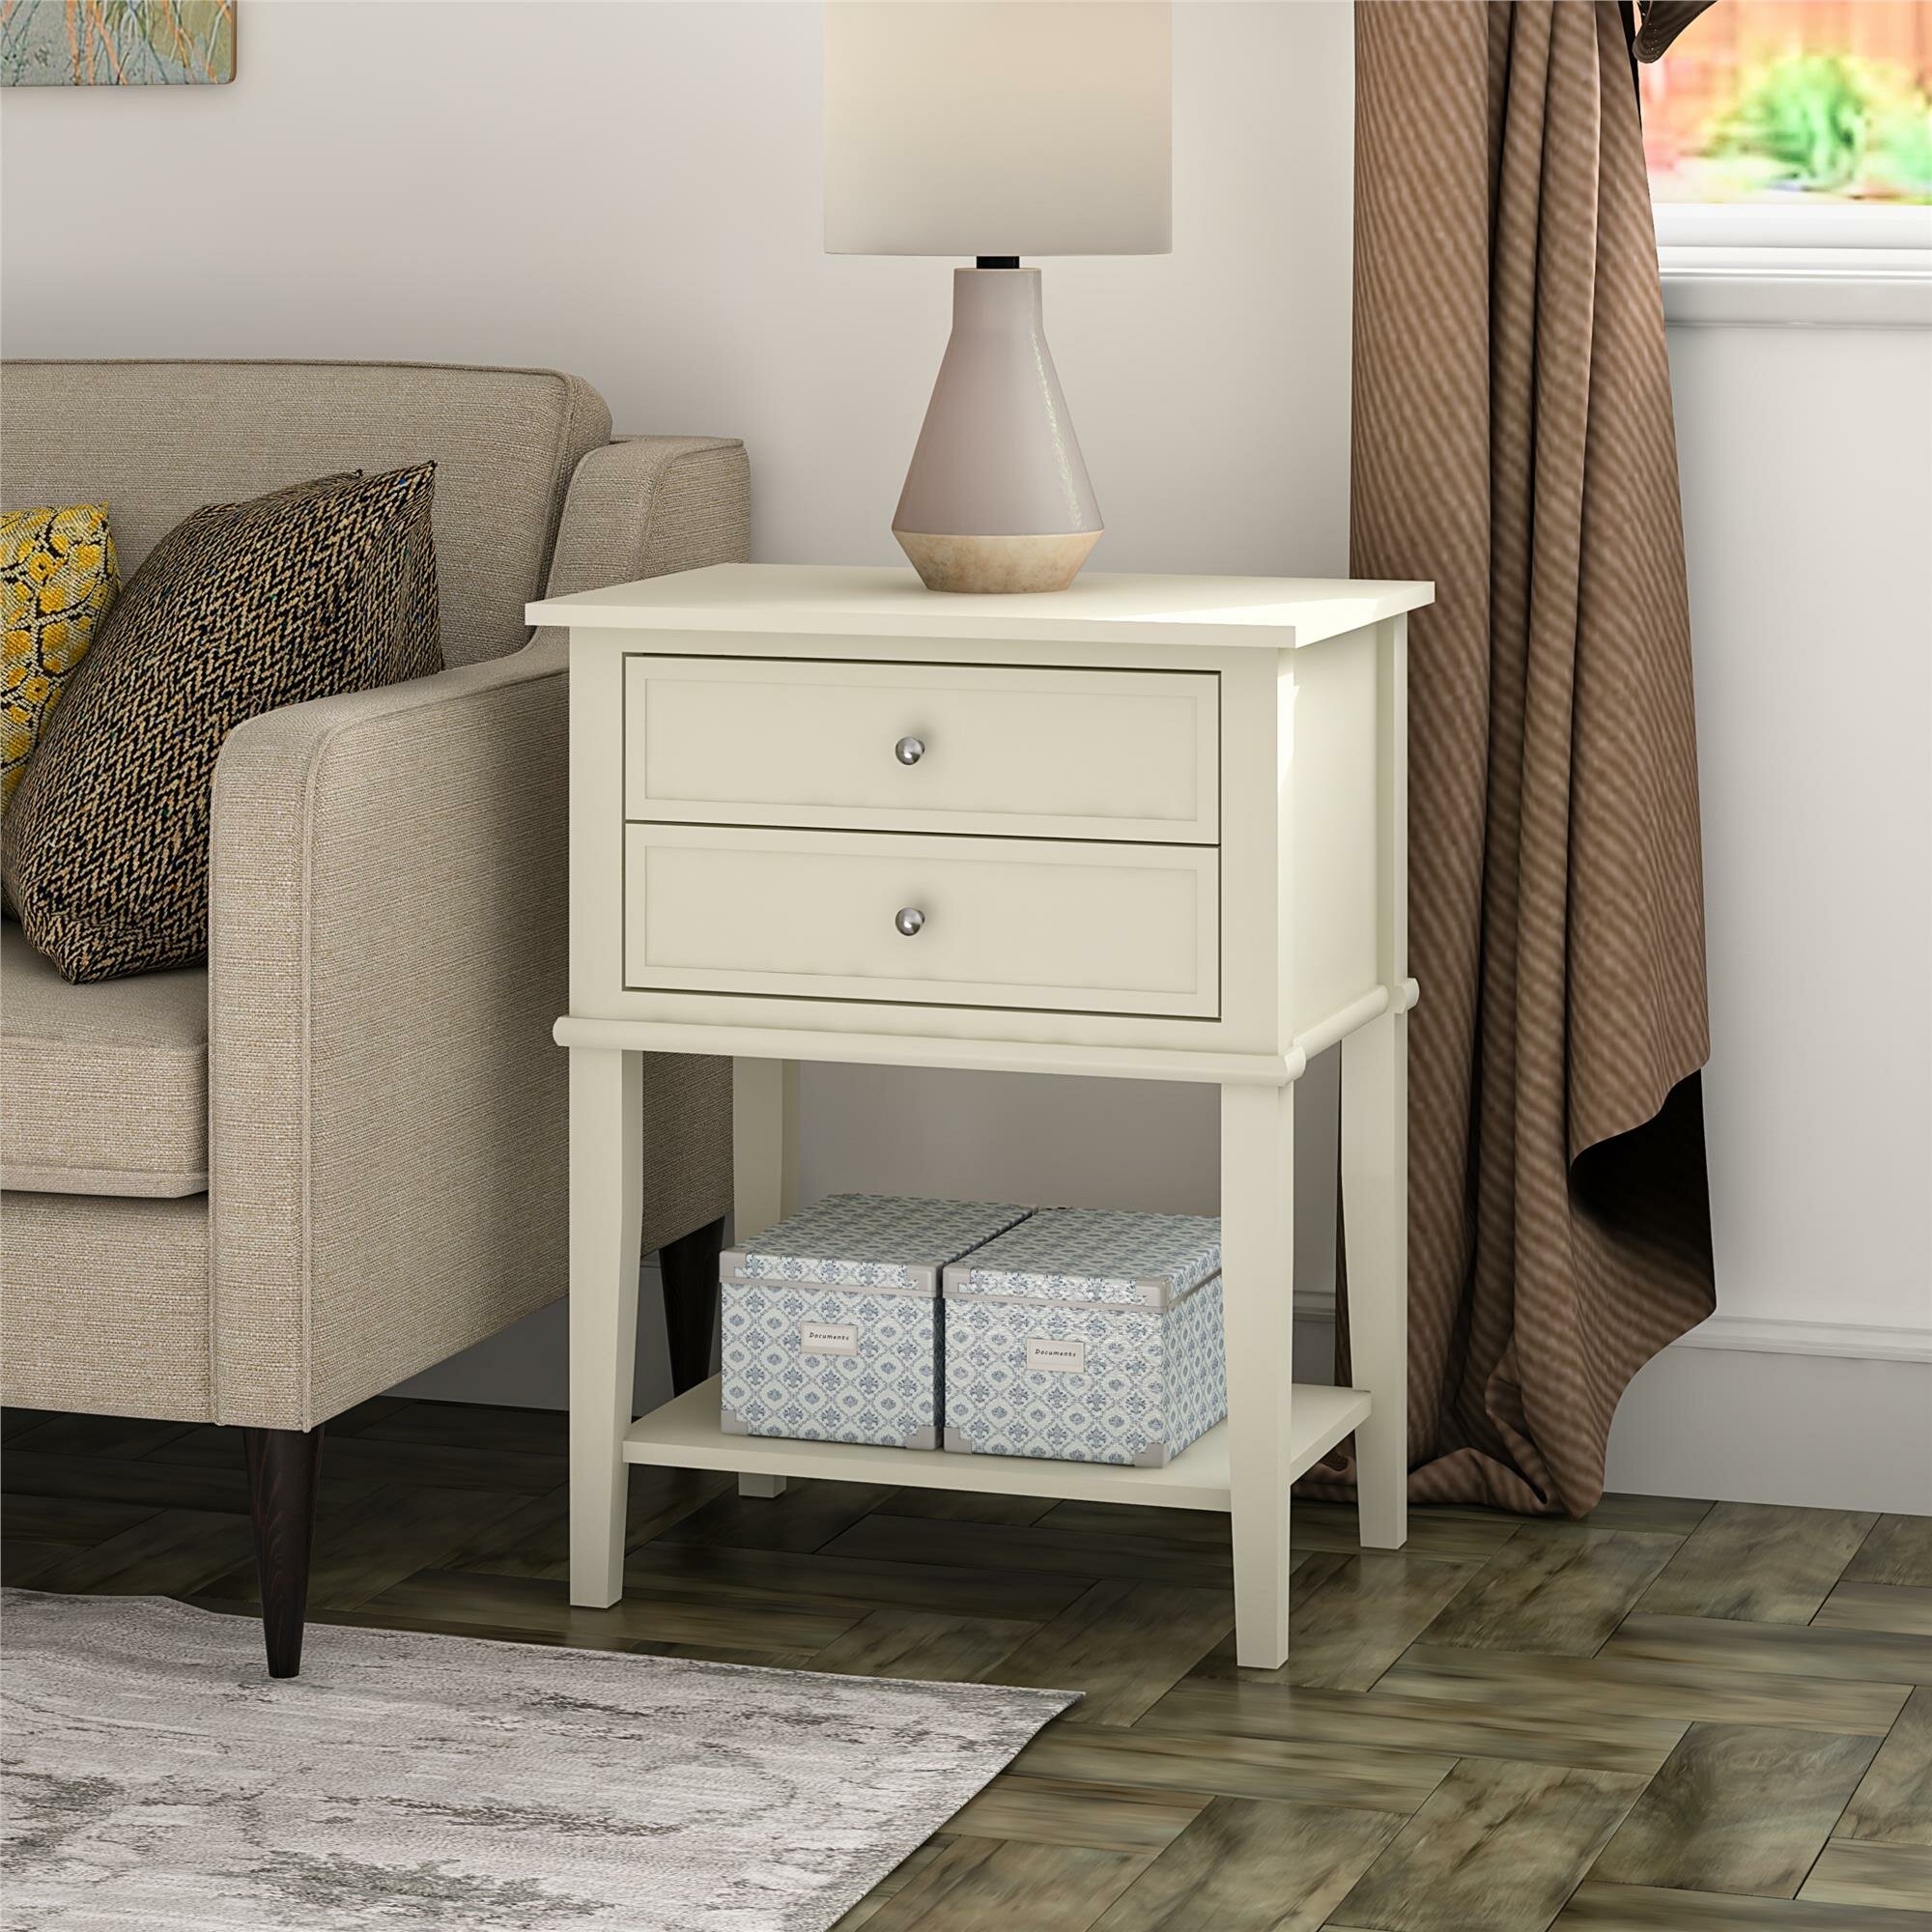 Bedroom Night Stand Bedside End Table 2 Layer w/Drawer Storage Living Room Shelf 